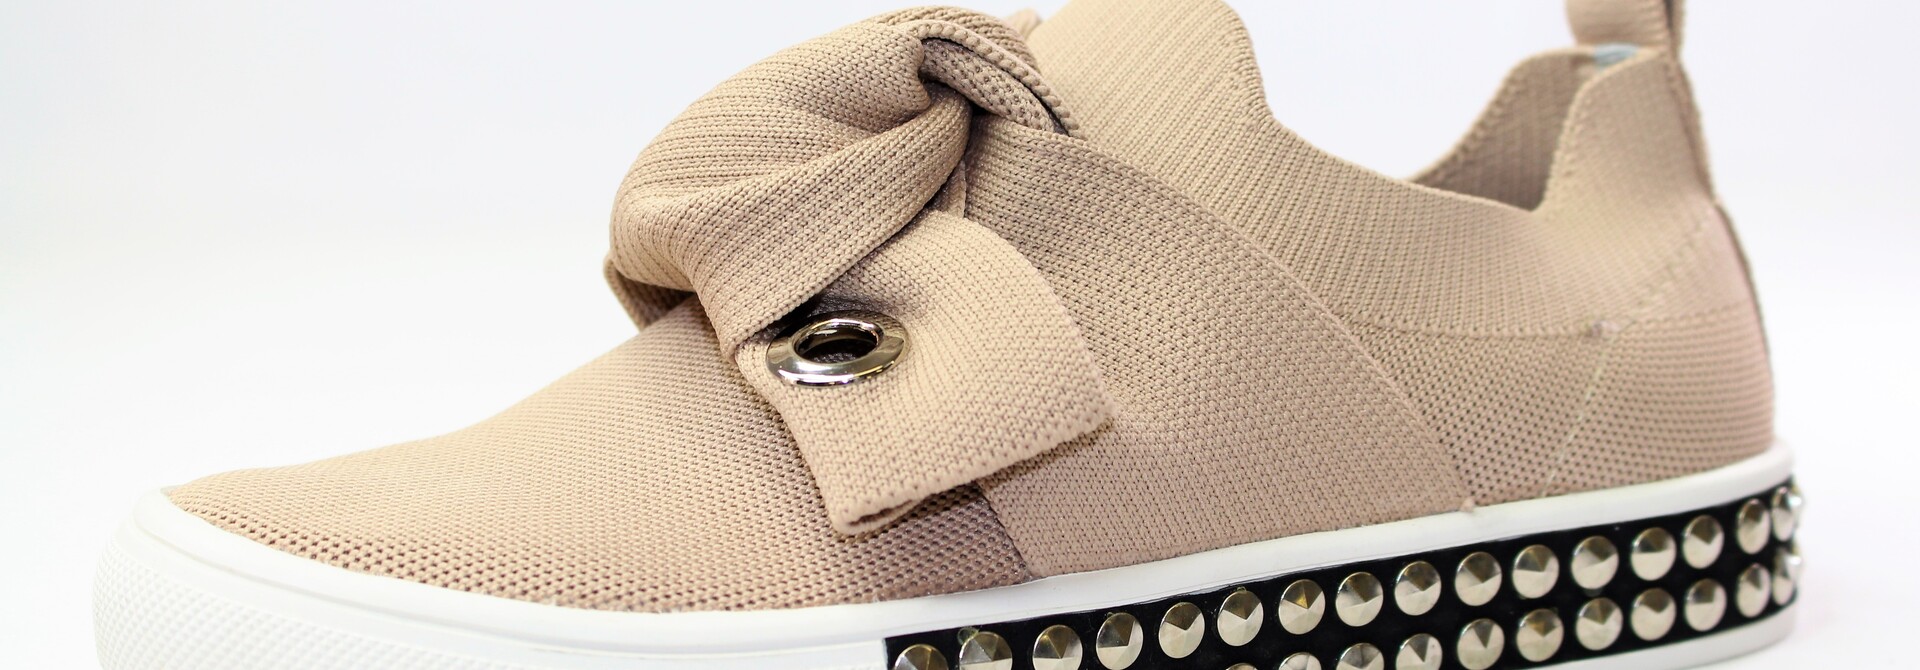 Knit Sneaker with Bow